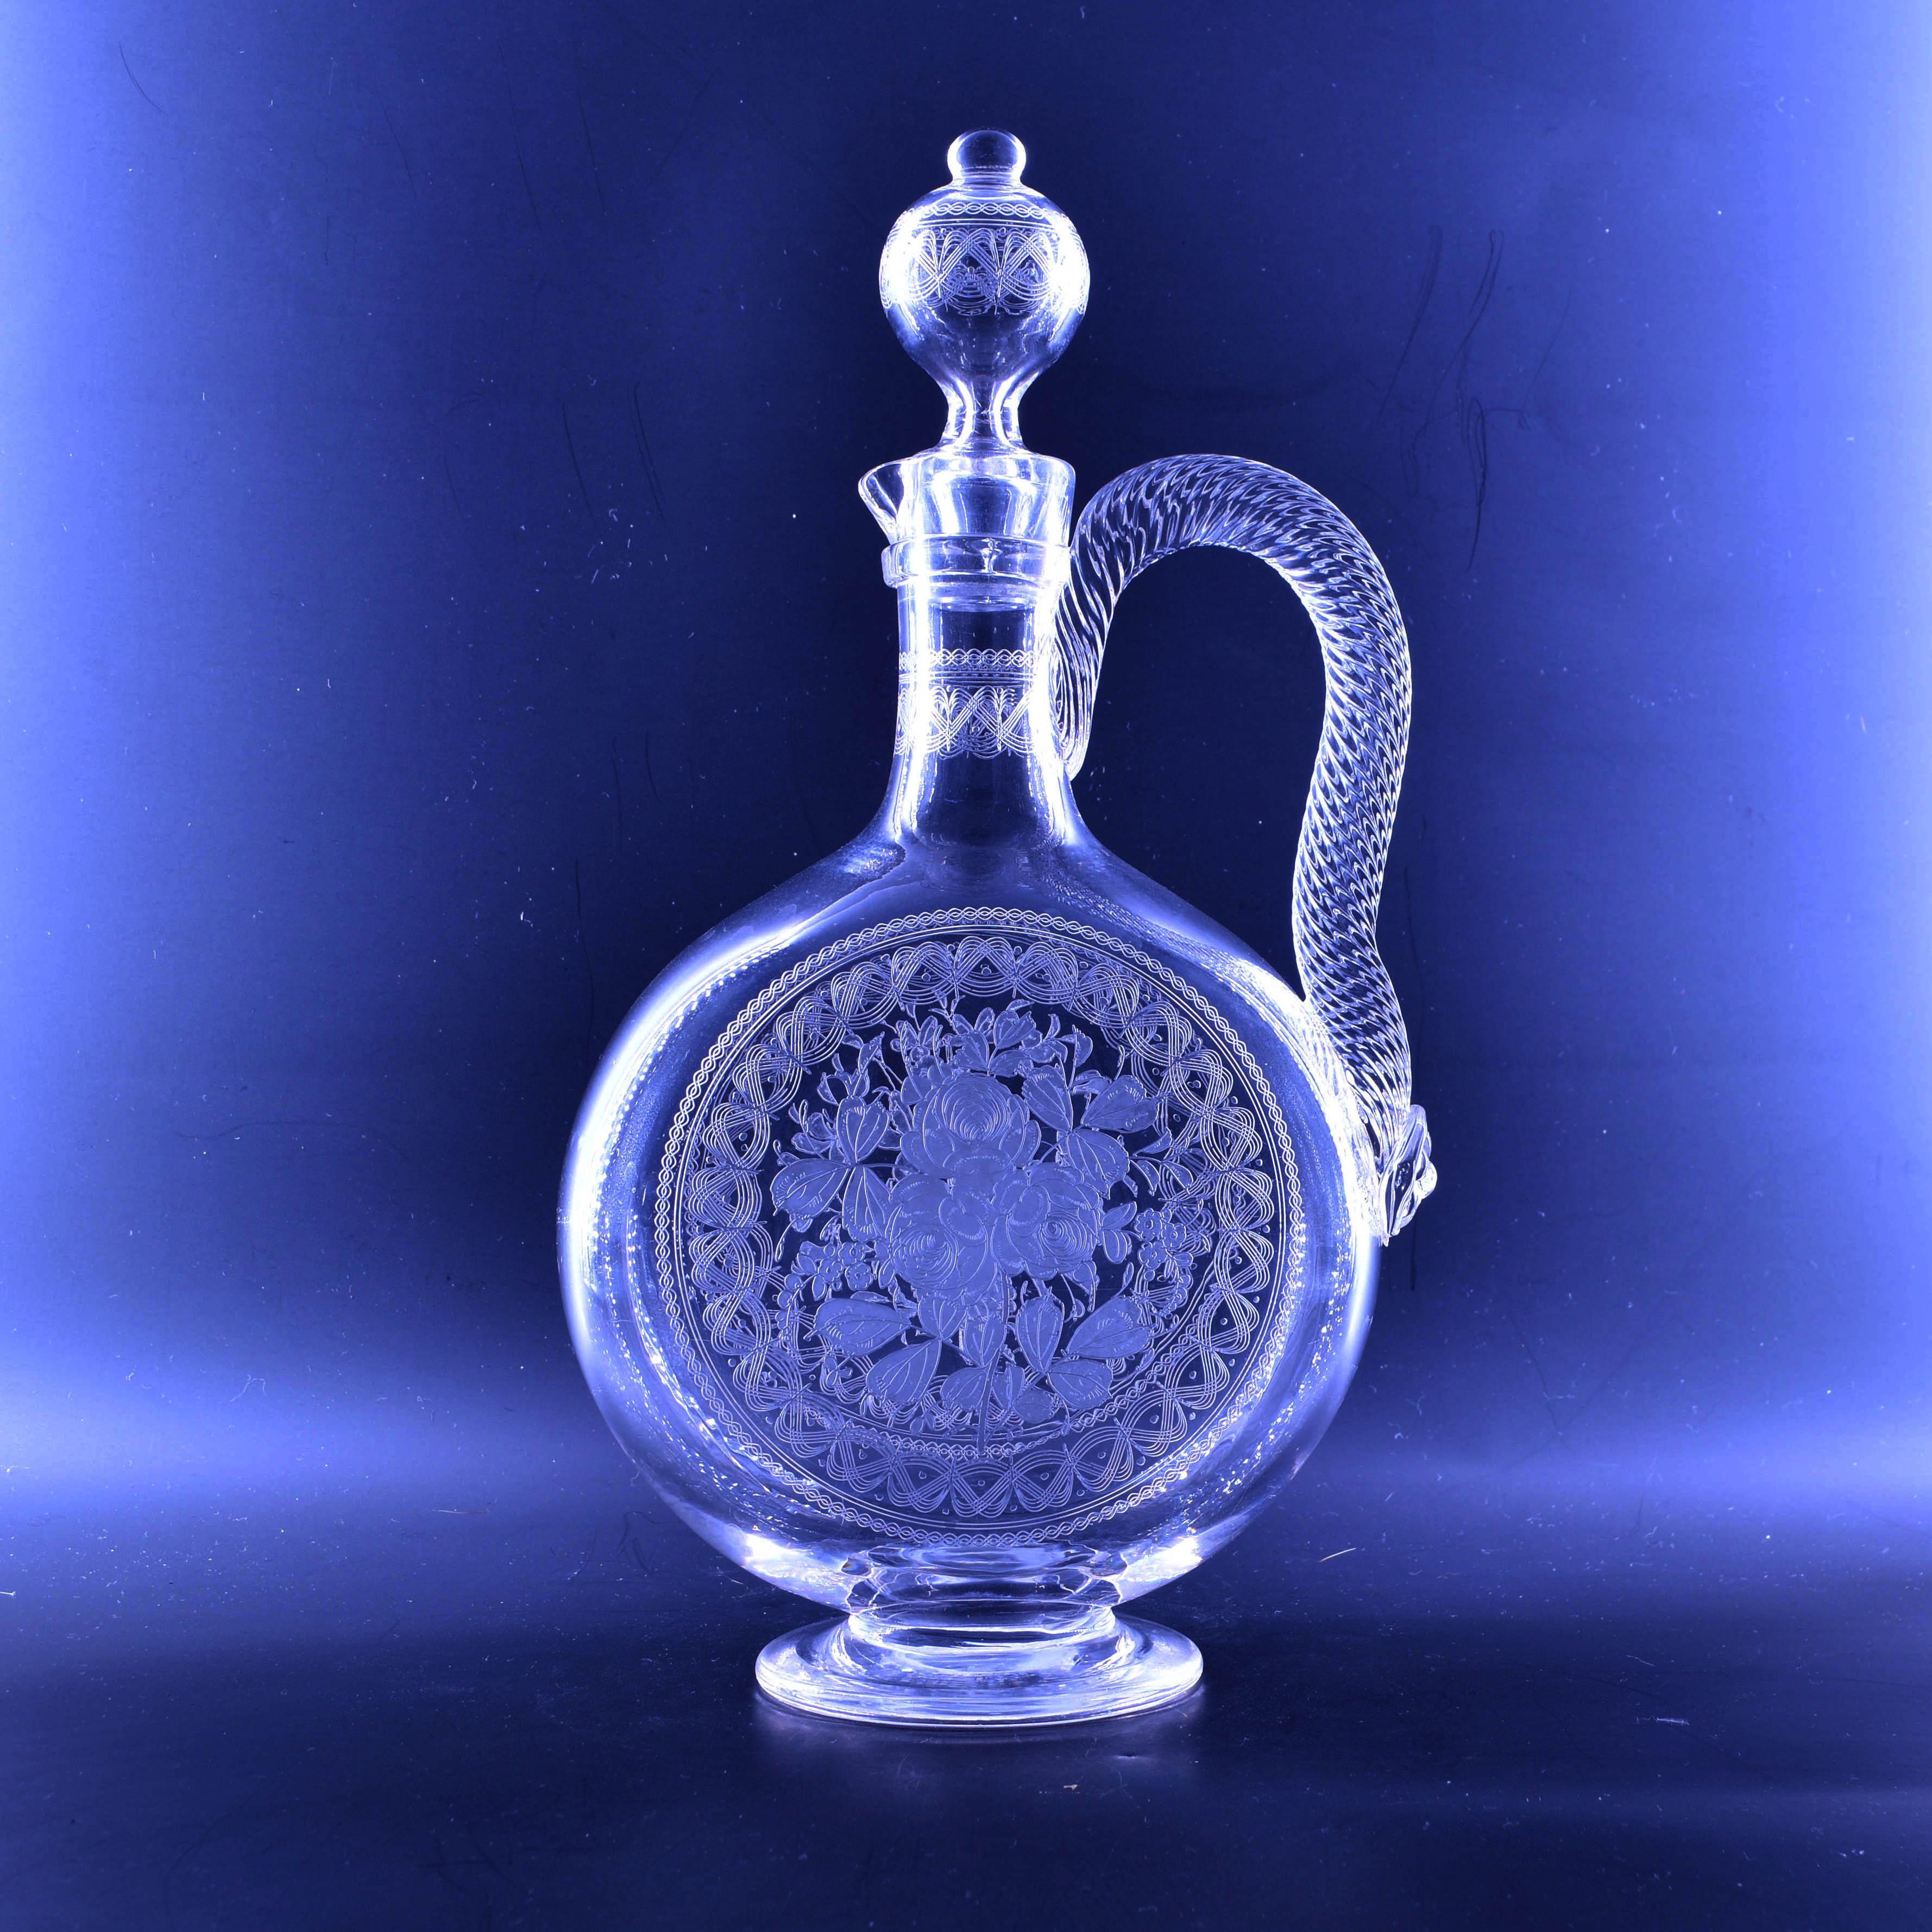 A 19th century Stourbridge claret jug, probably by Richardsons, of footed moon-flask form with slender neck, rope twist handle and hollow blown stopper, acid etched with cartouche panels of flowers and foliage.

Richardsons of Stourbridge was a